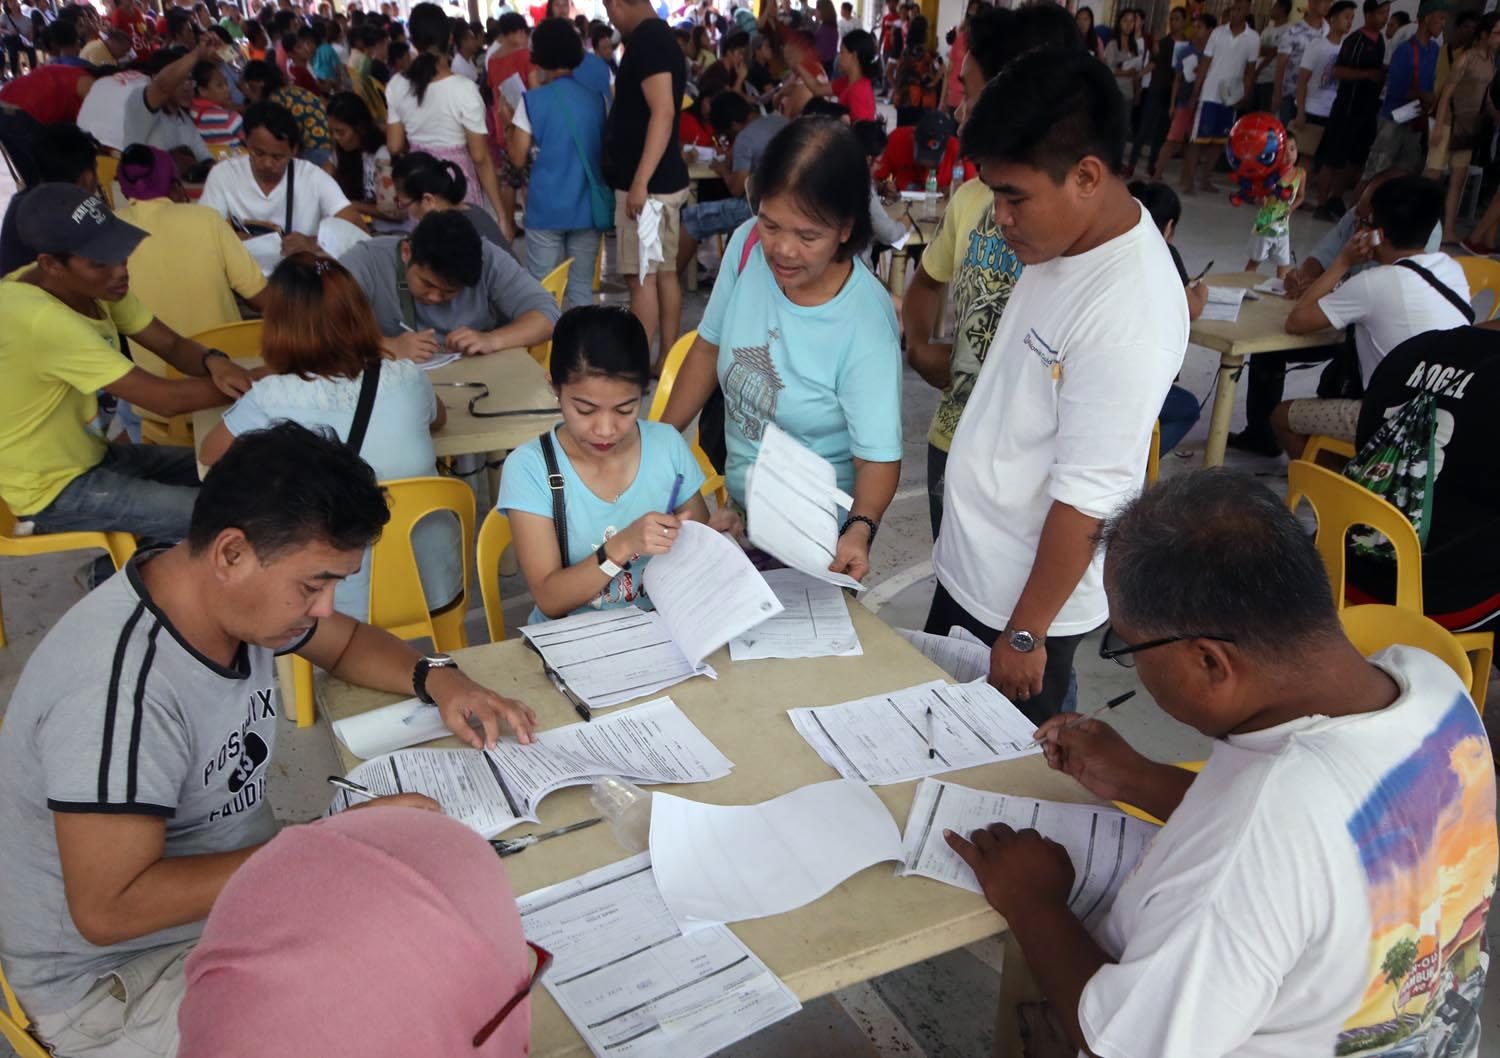 #PHvote: How to register as voter in the Philippines